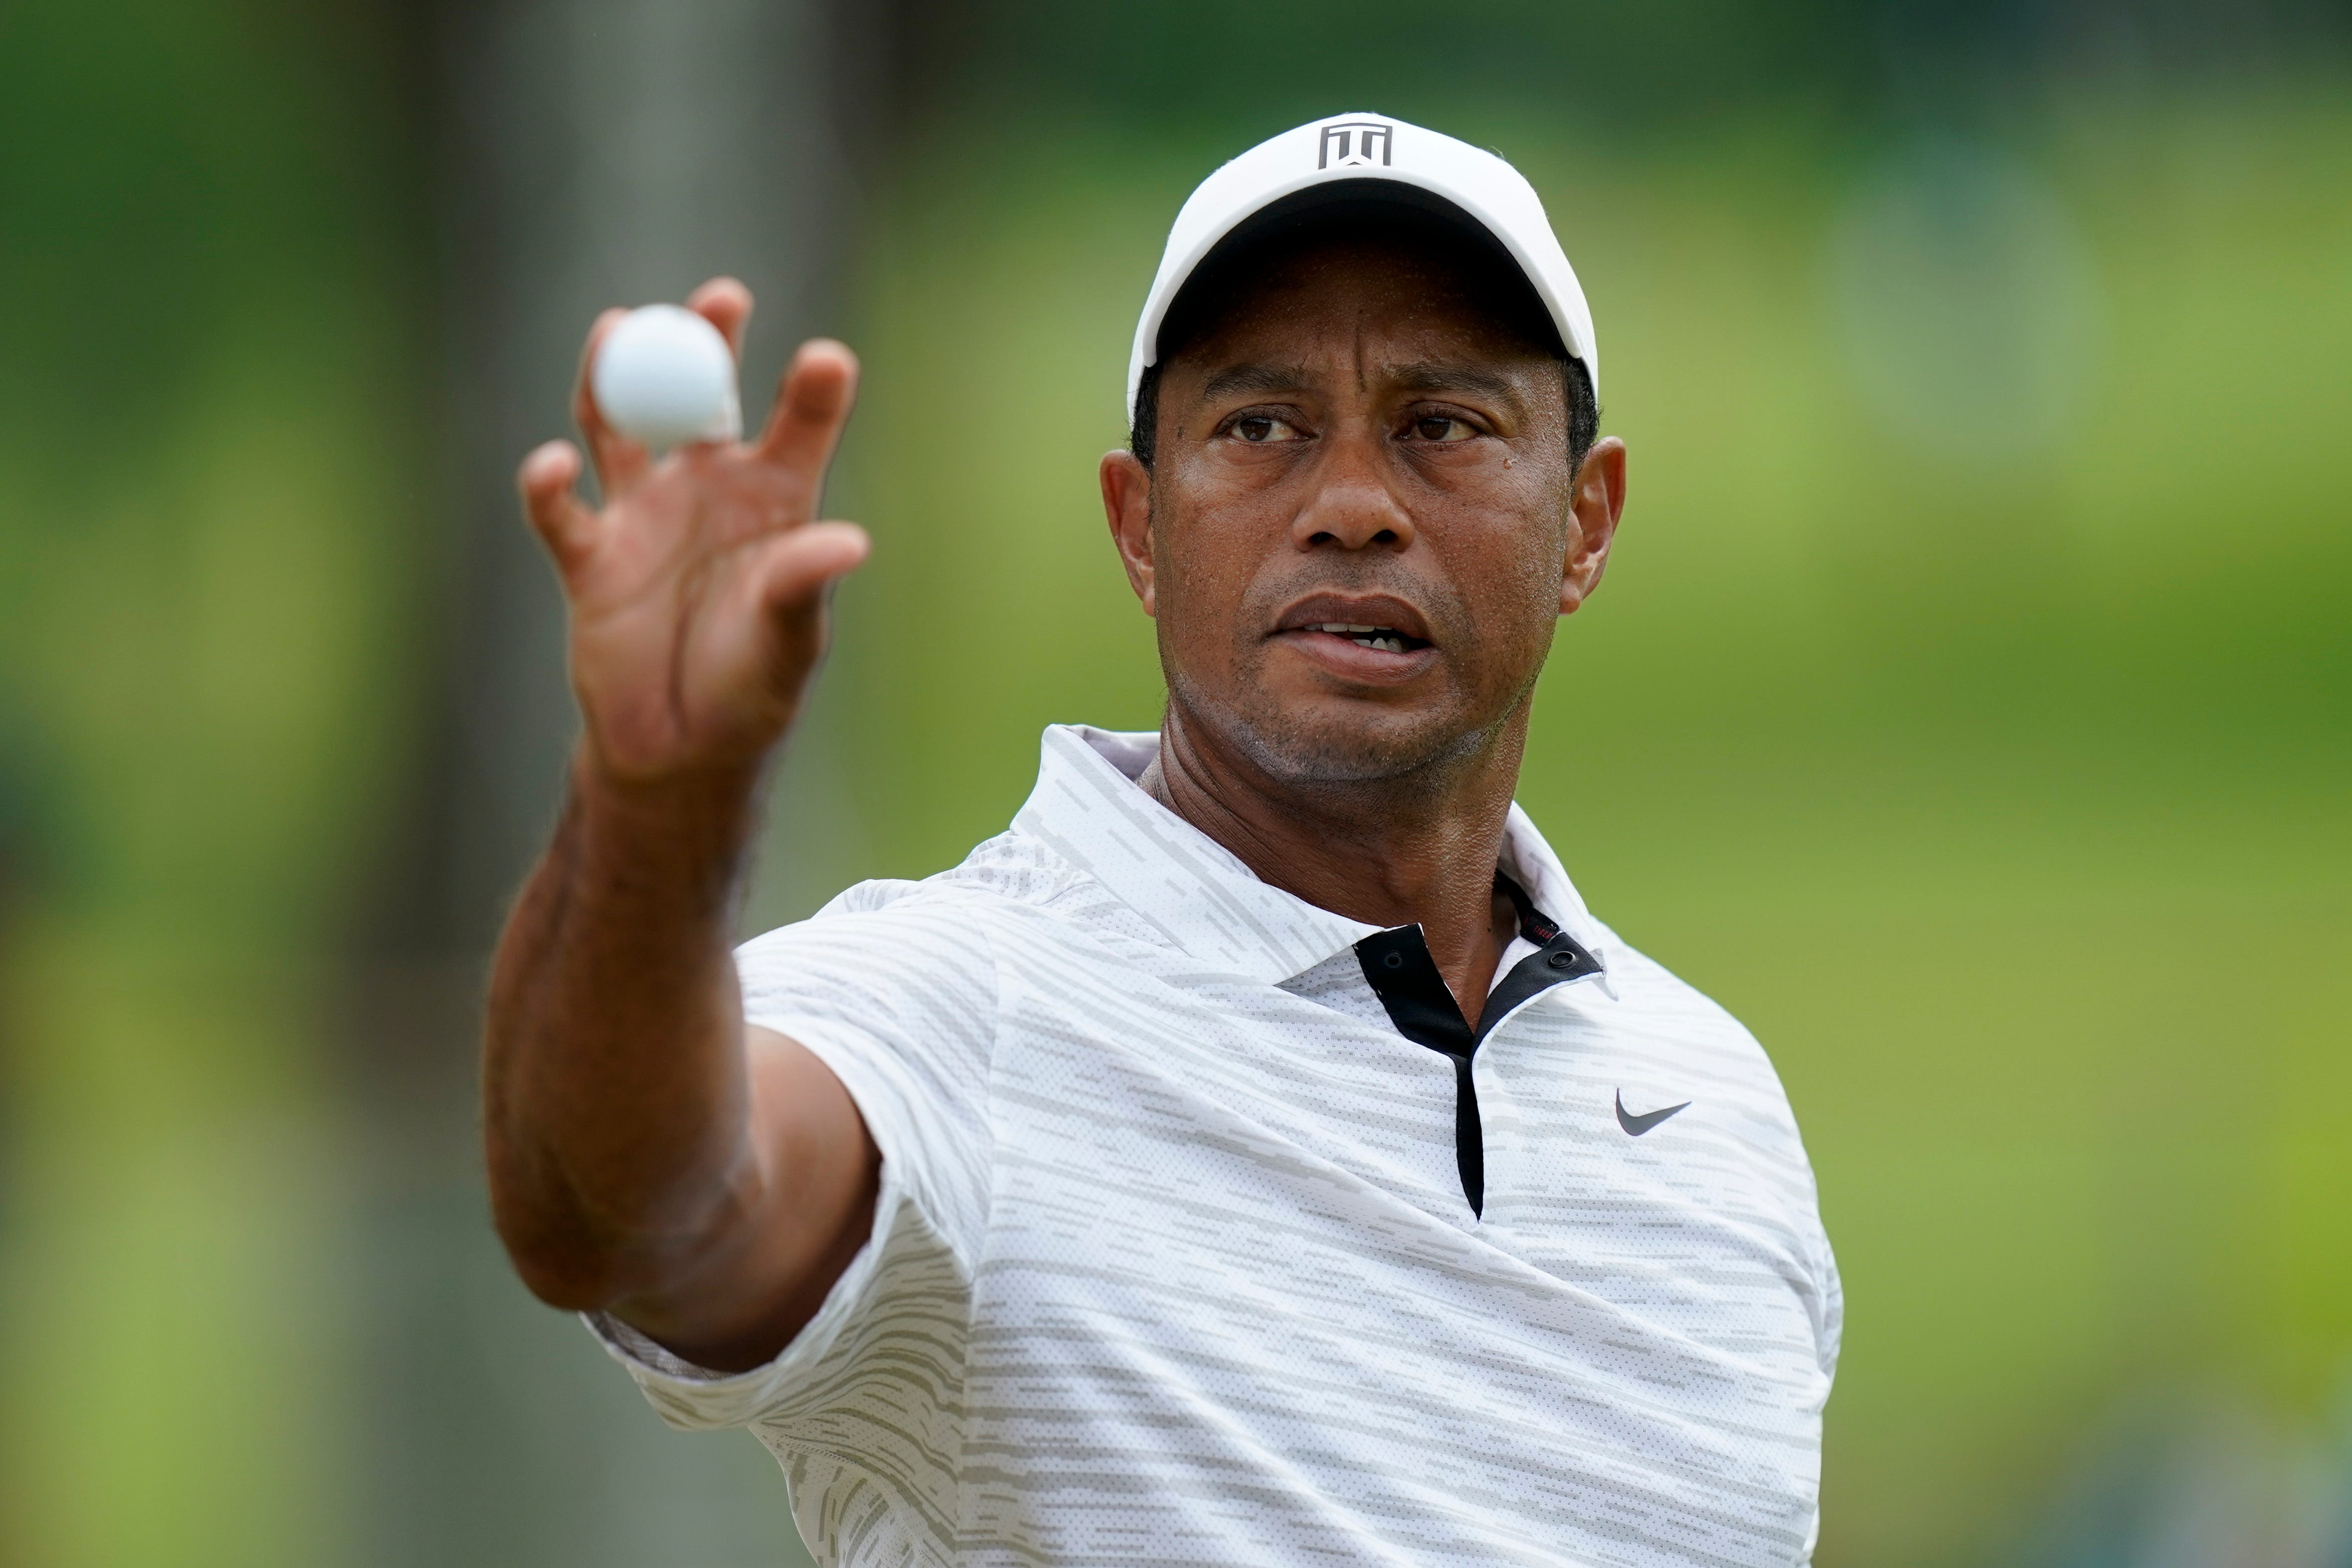 usatoday.com - Adam Schupak - Tiger Woods denounces Phil Mickelson's views on professional golf, plants his flag firmly behind PGA Tour